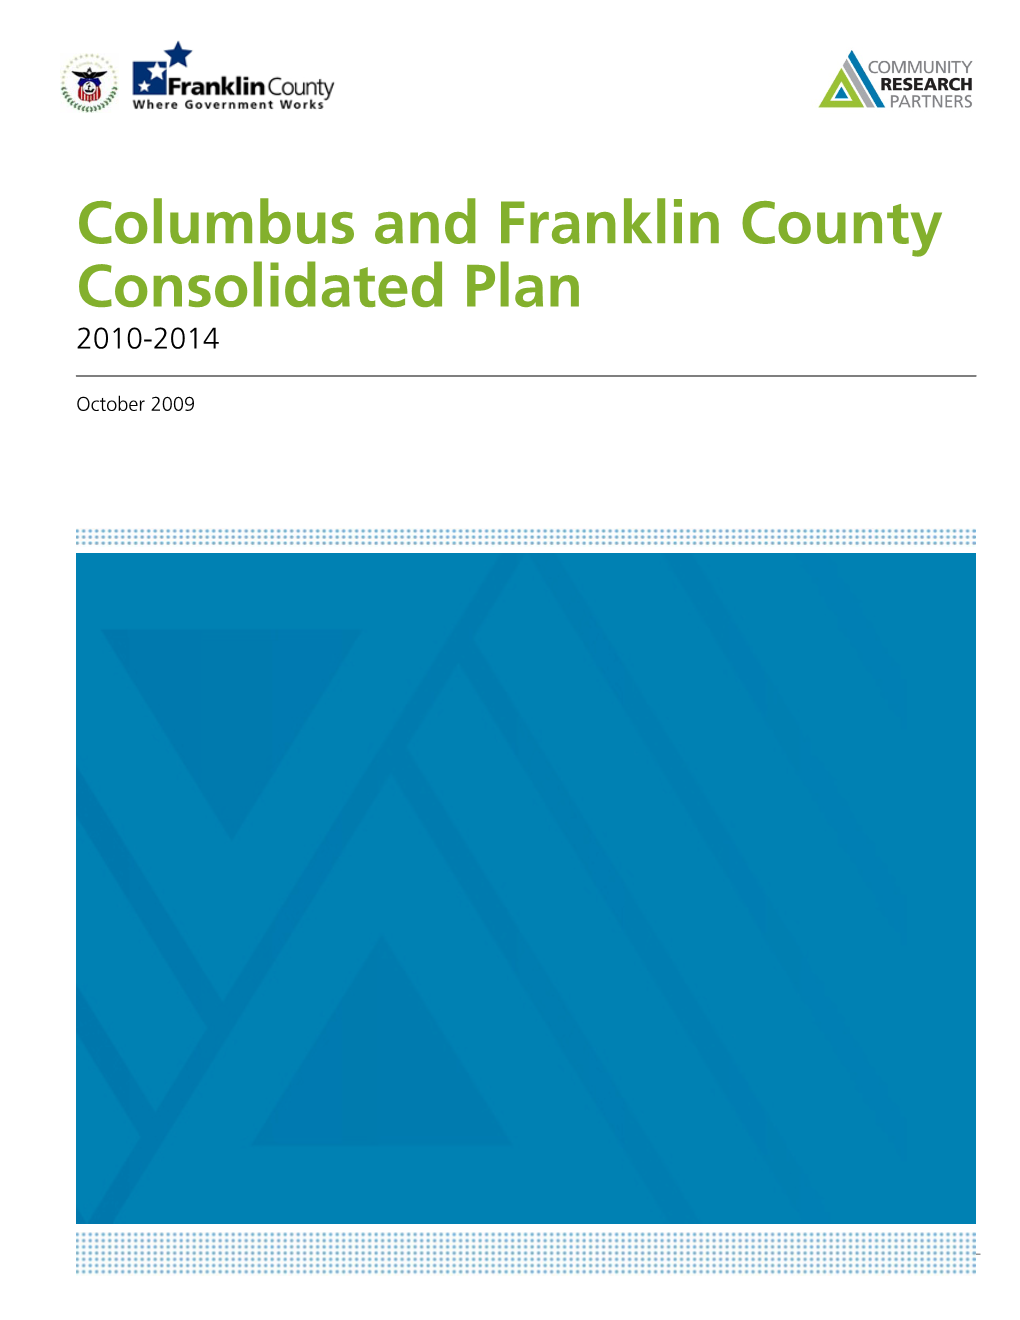 Columbus and Franklin County Consolidated Plan 2010-2014